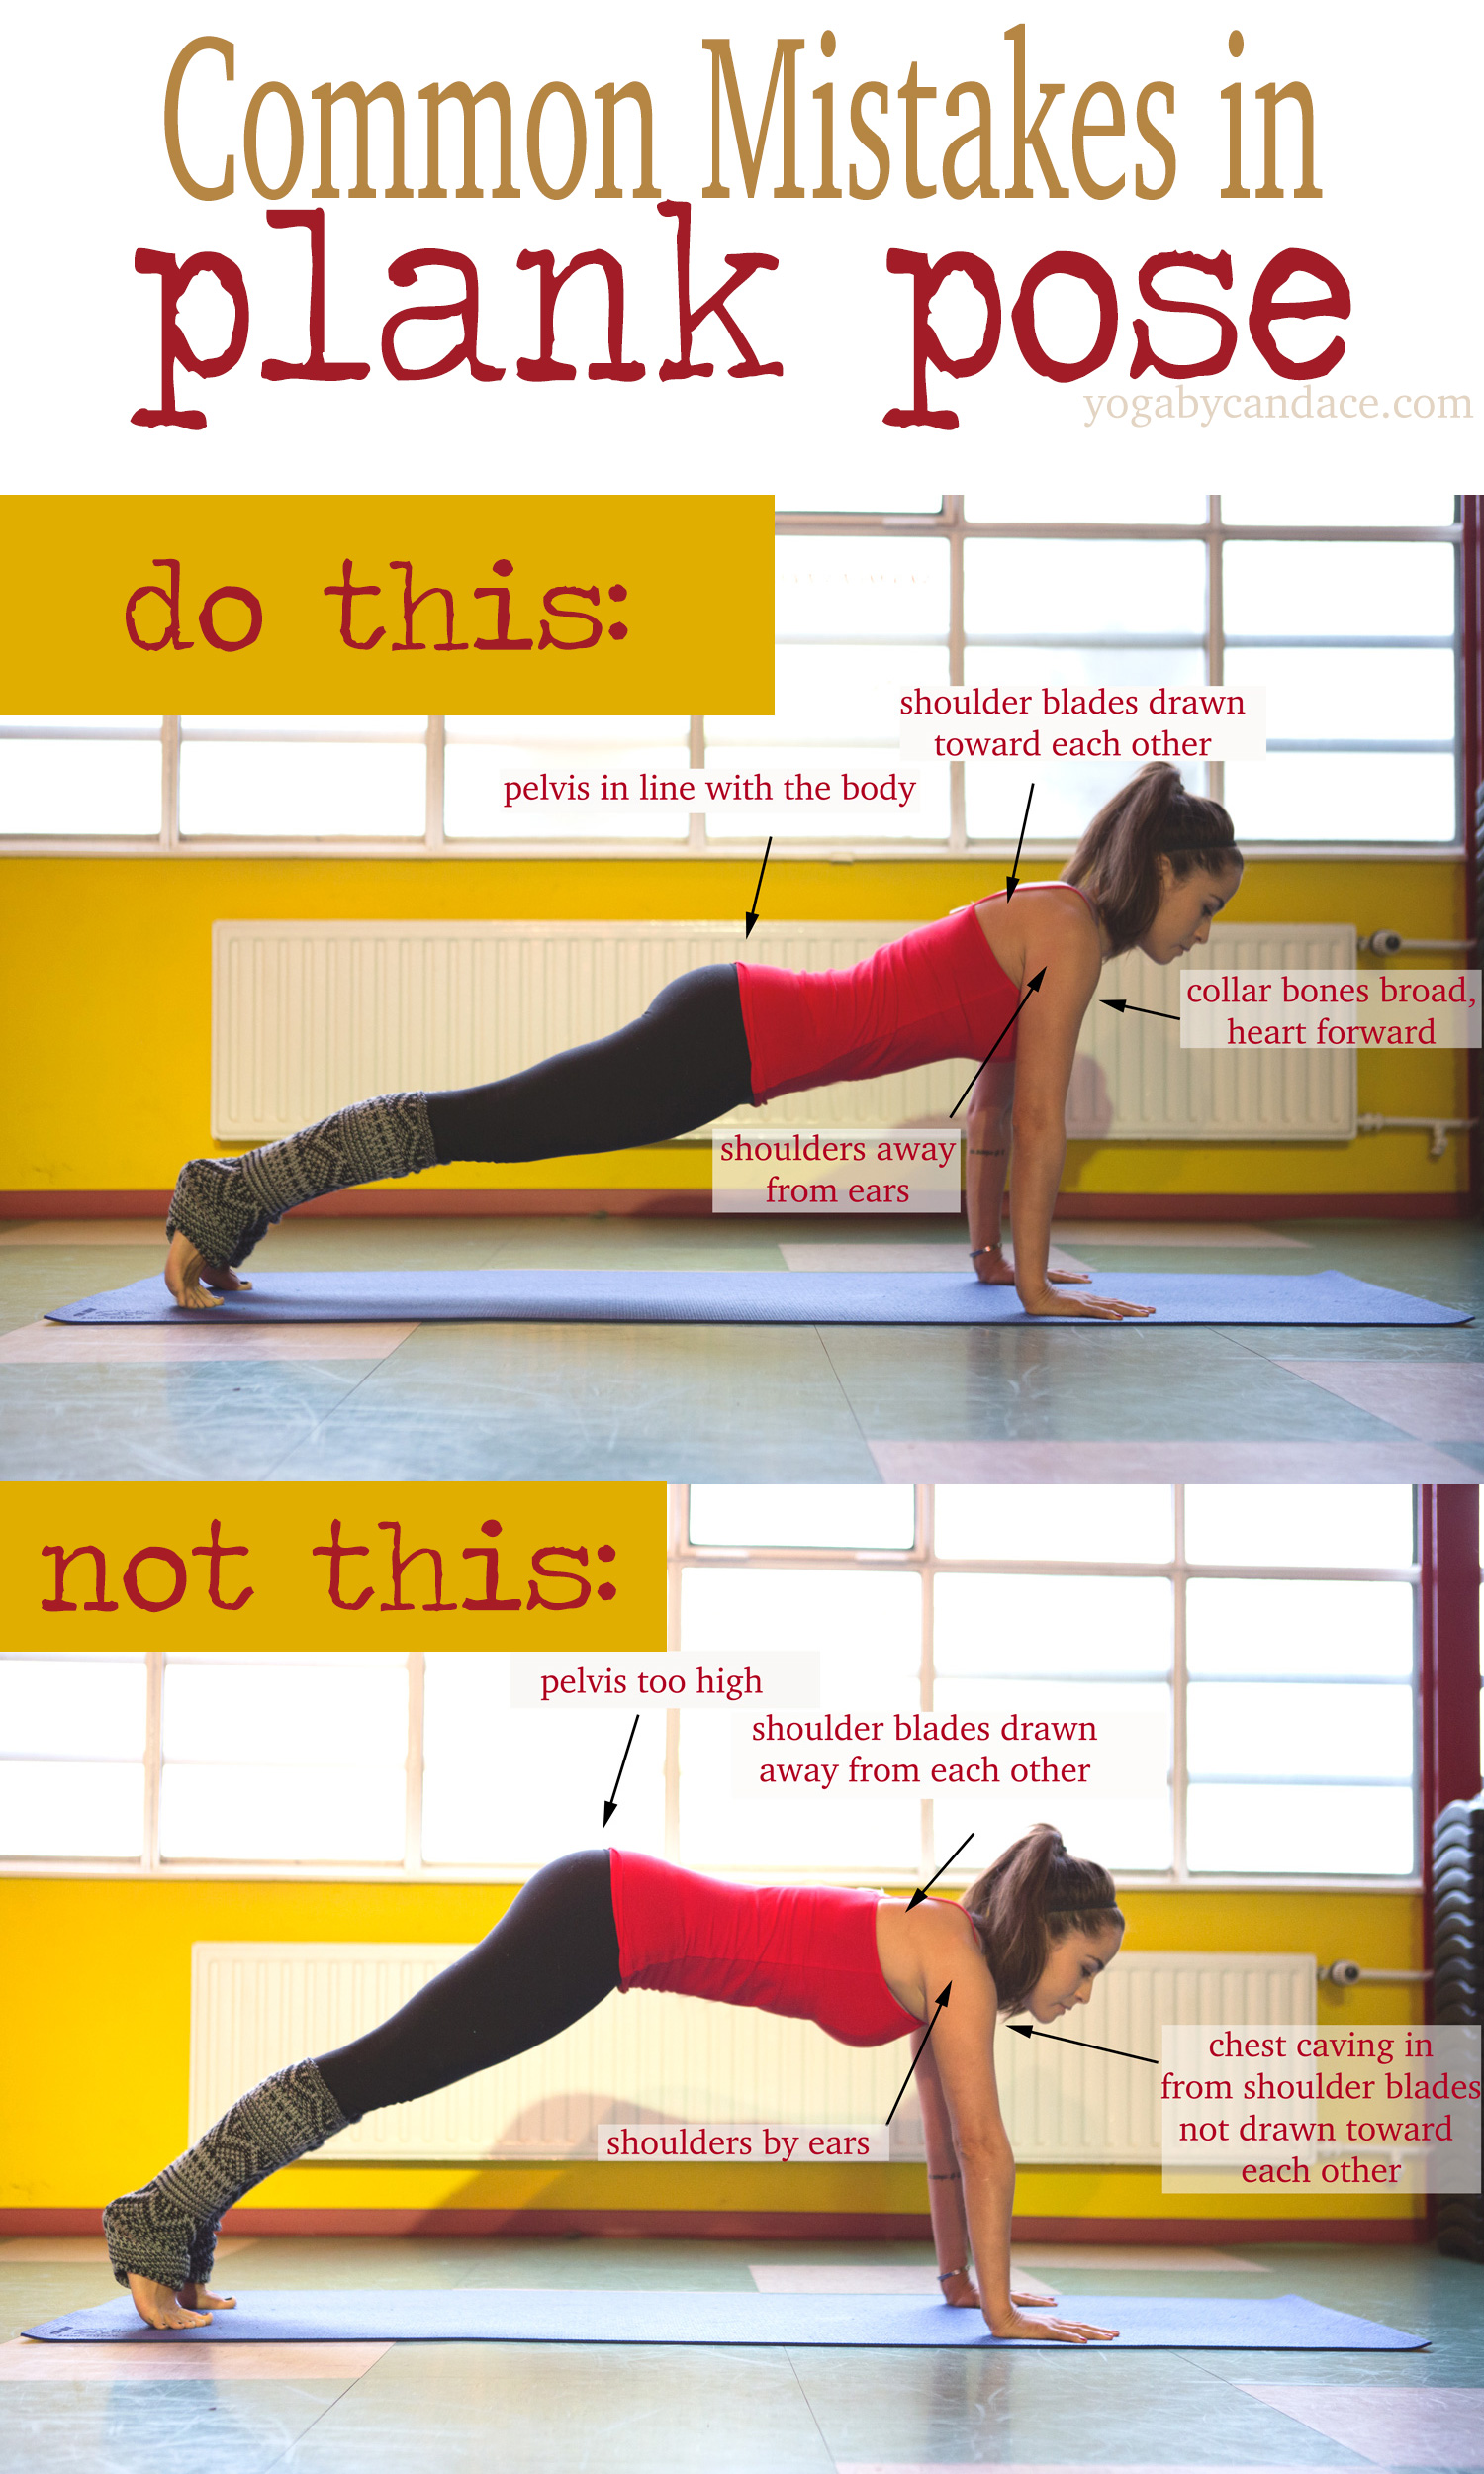 Pin it! Common mistakes in plank pose and how to fix them.